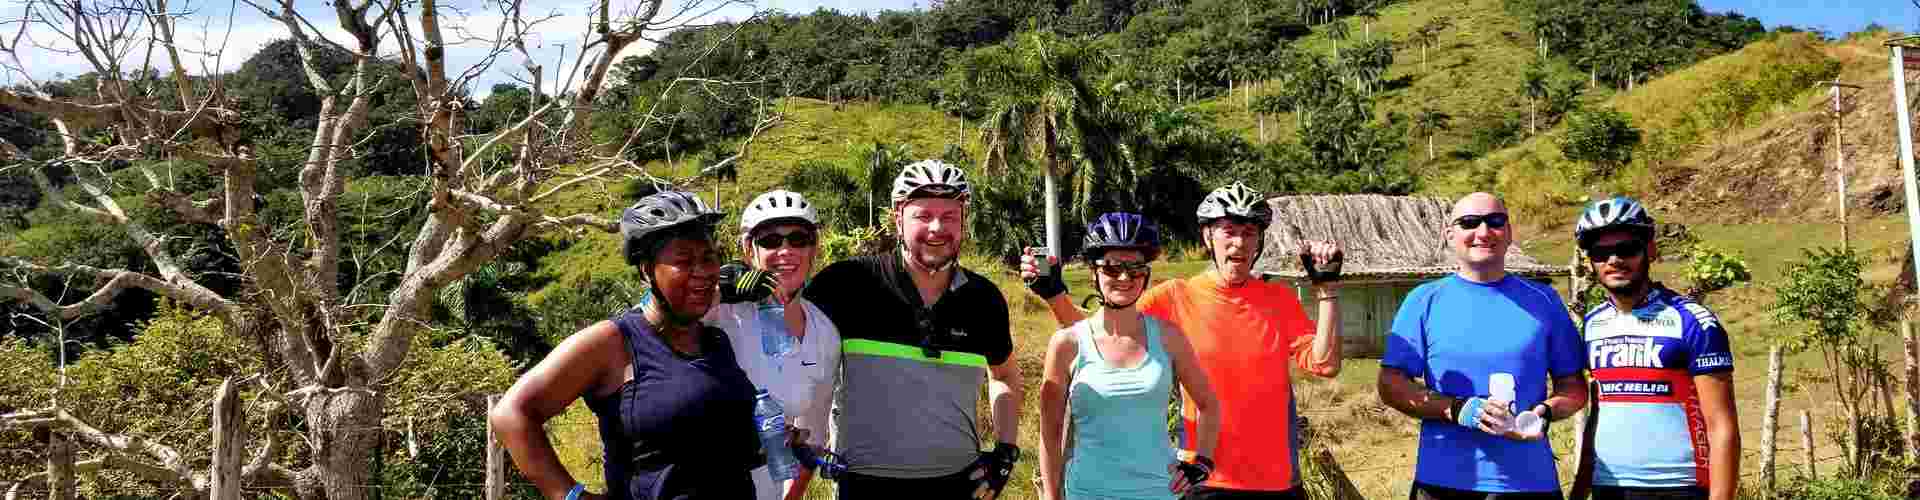 Intrepid travellers on a cycling tour in Central America